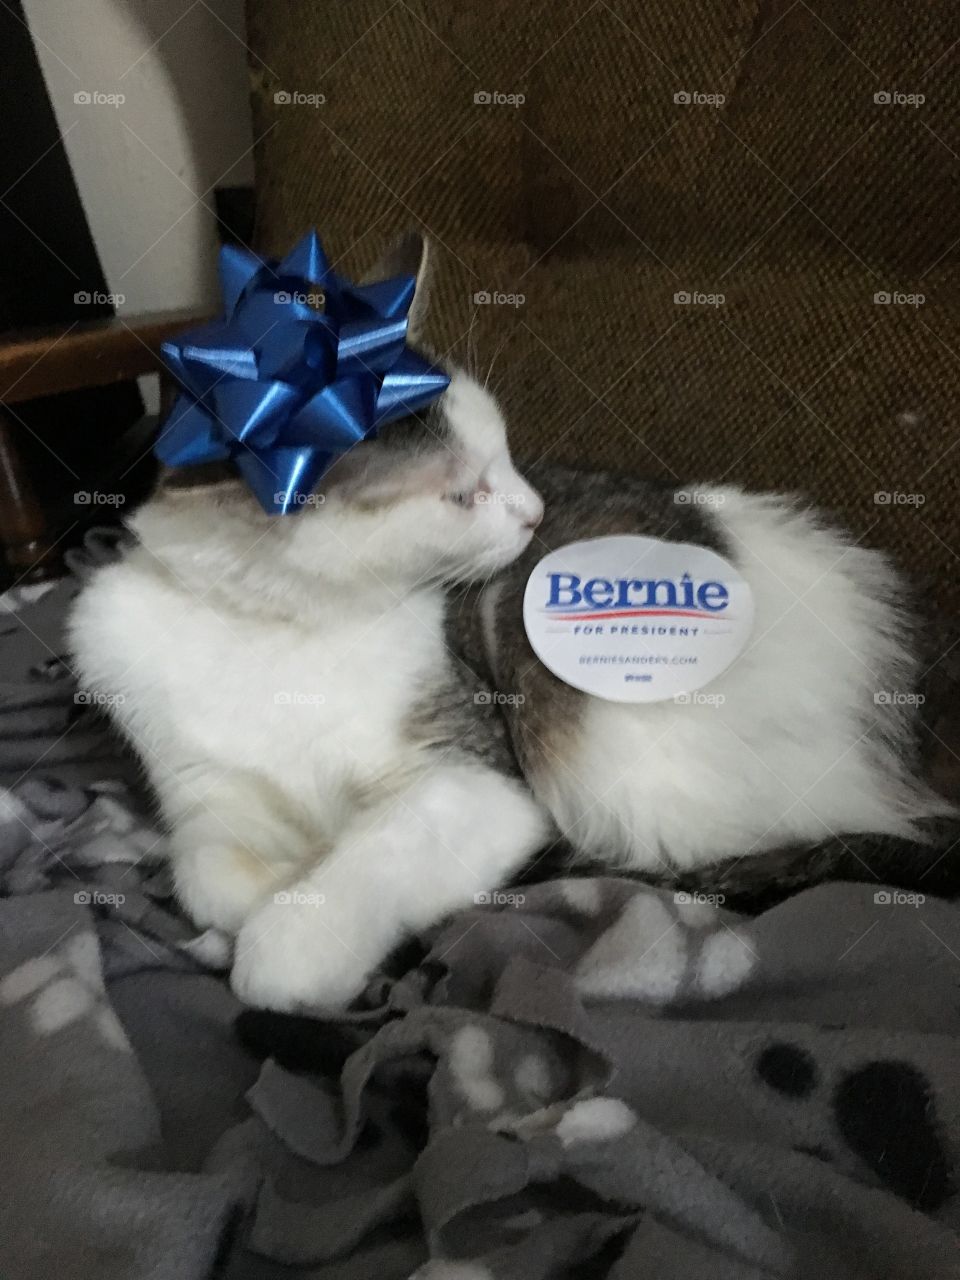 arya wants YOU to vote for bernie